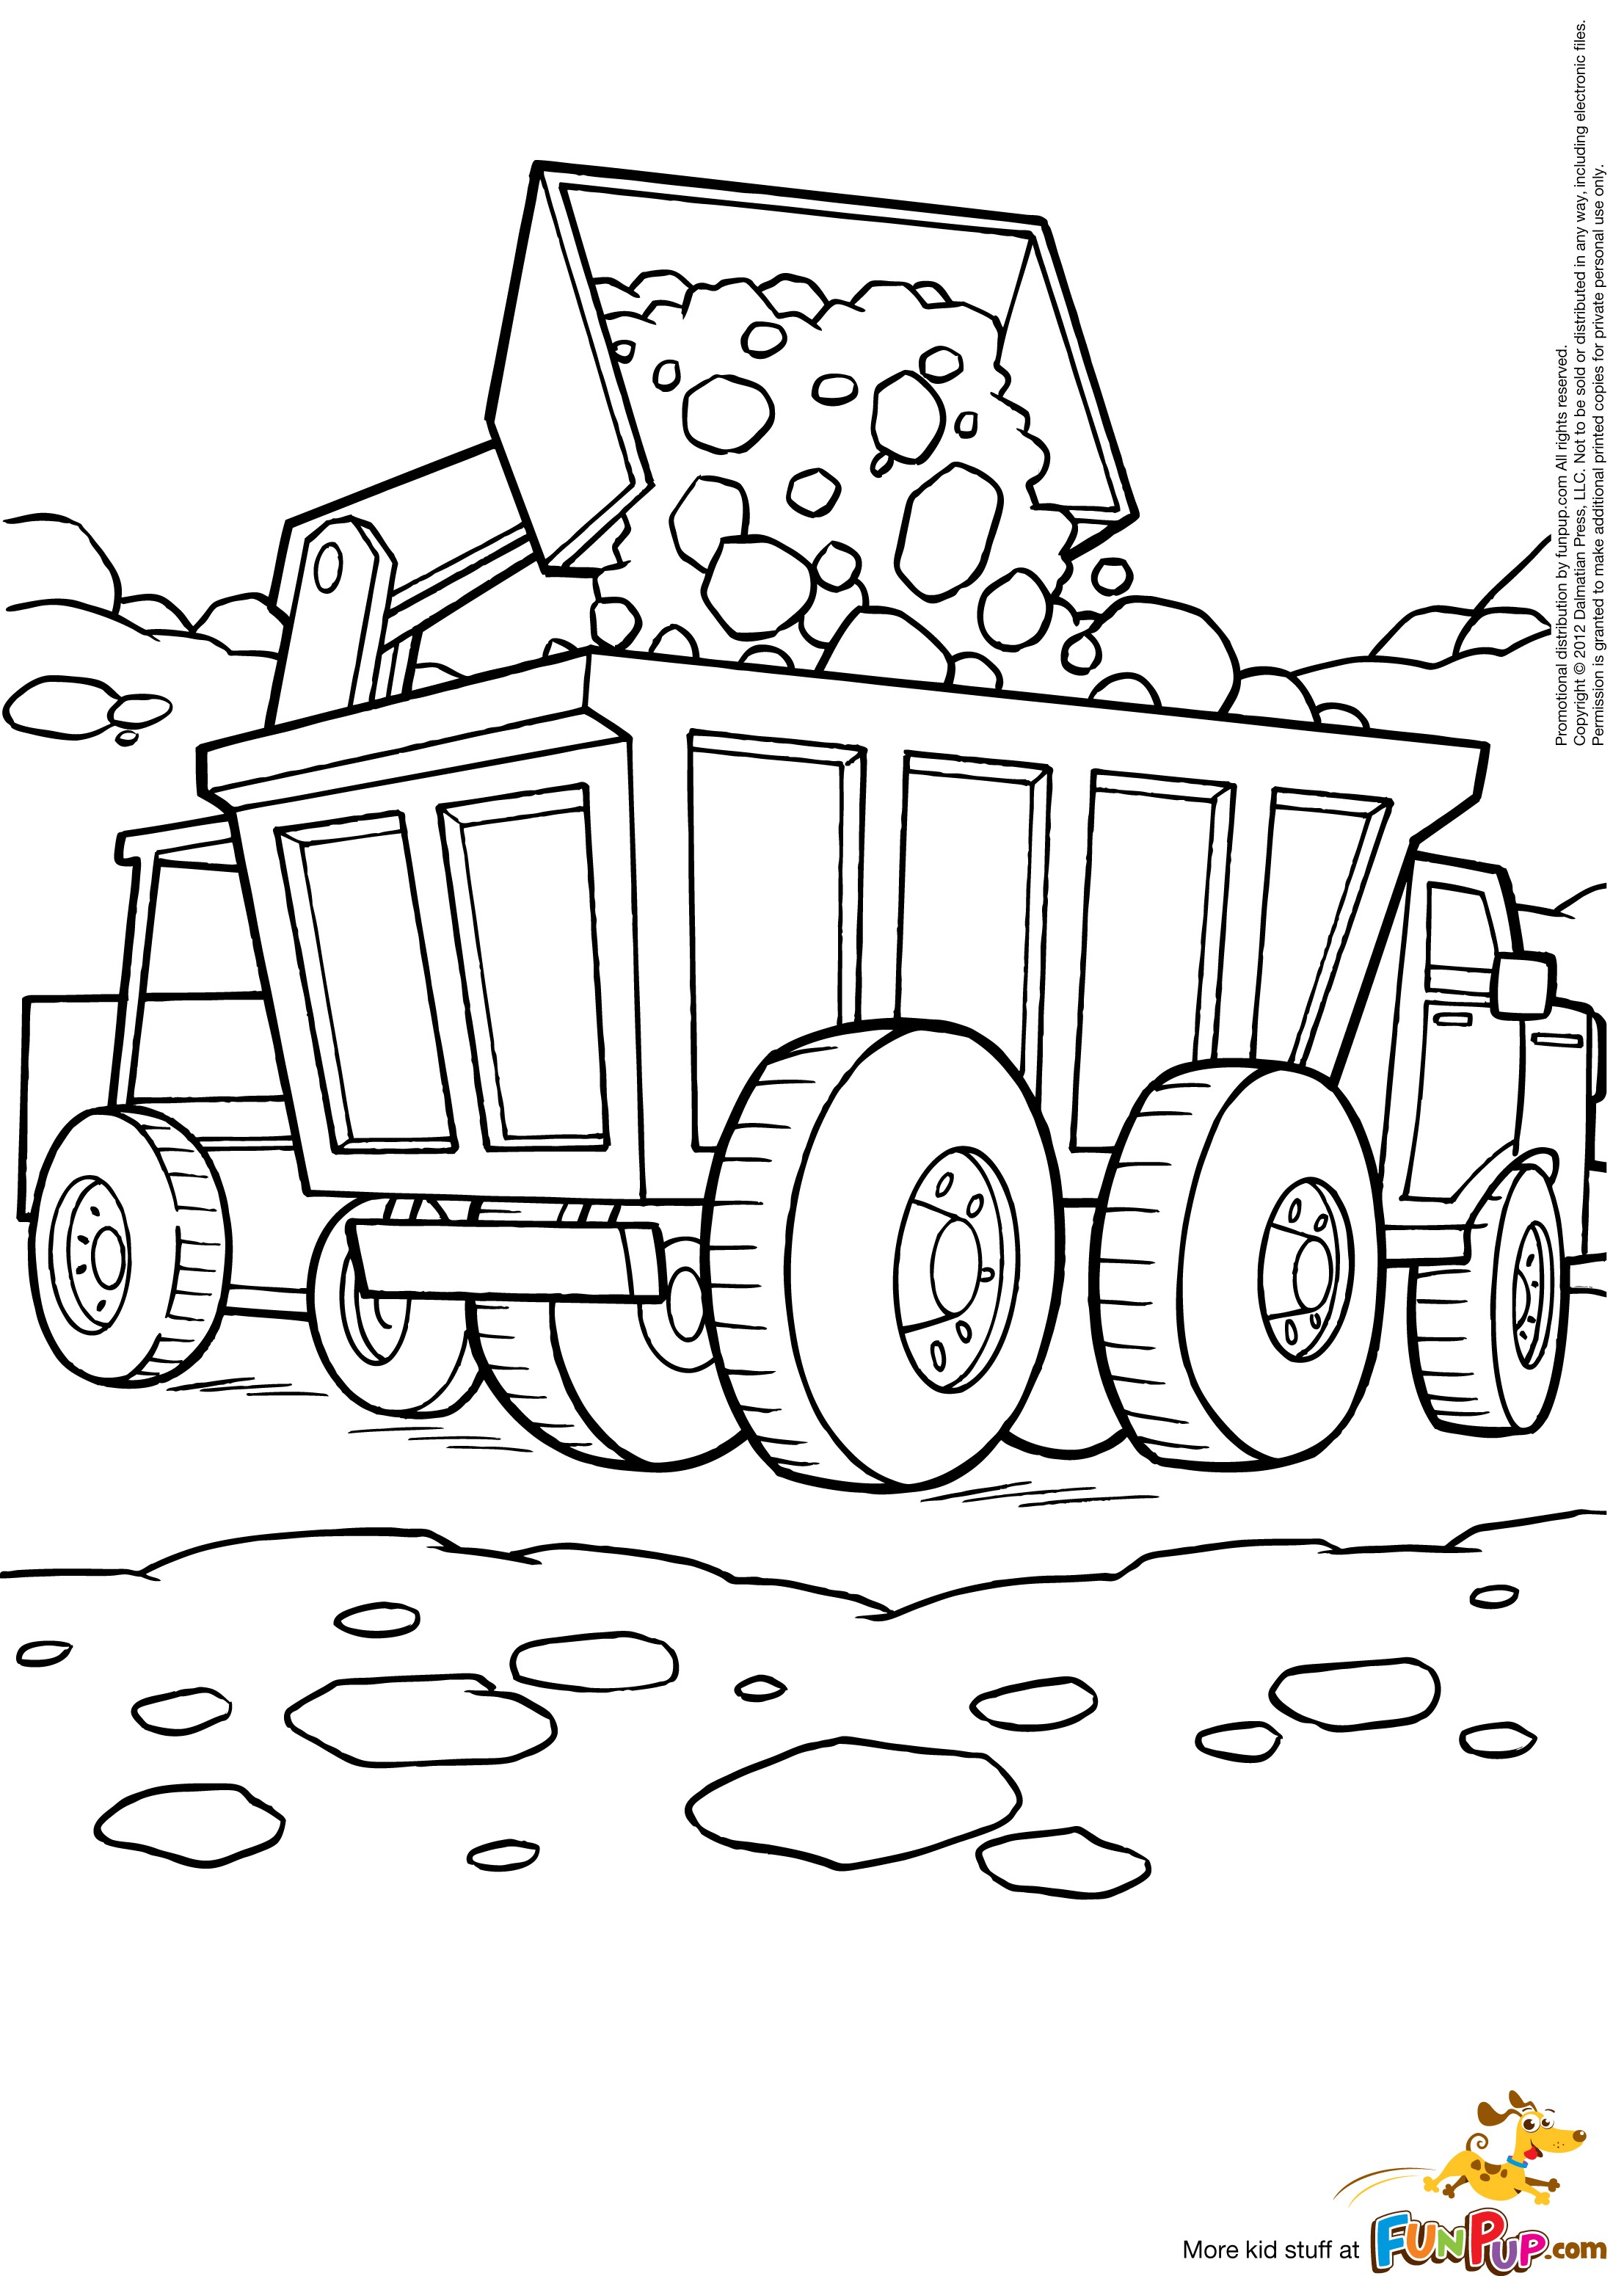 Download Excavator Coloring Pages to download and print for free